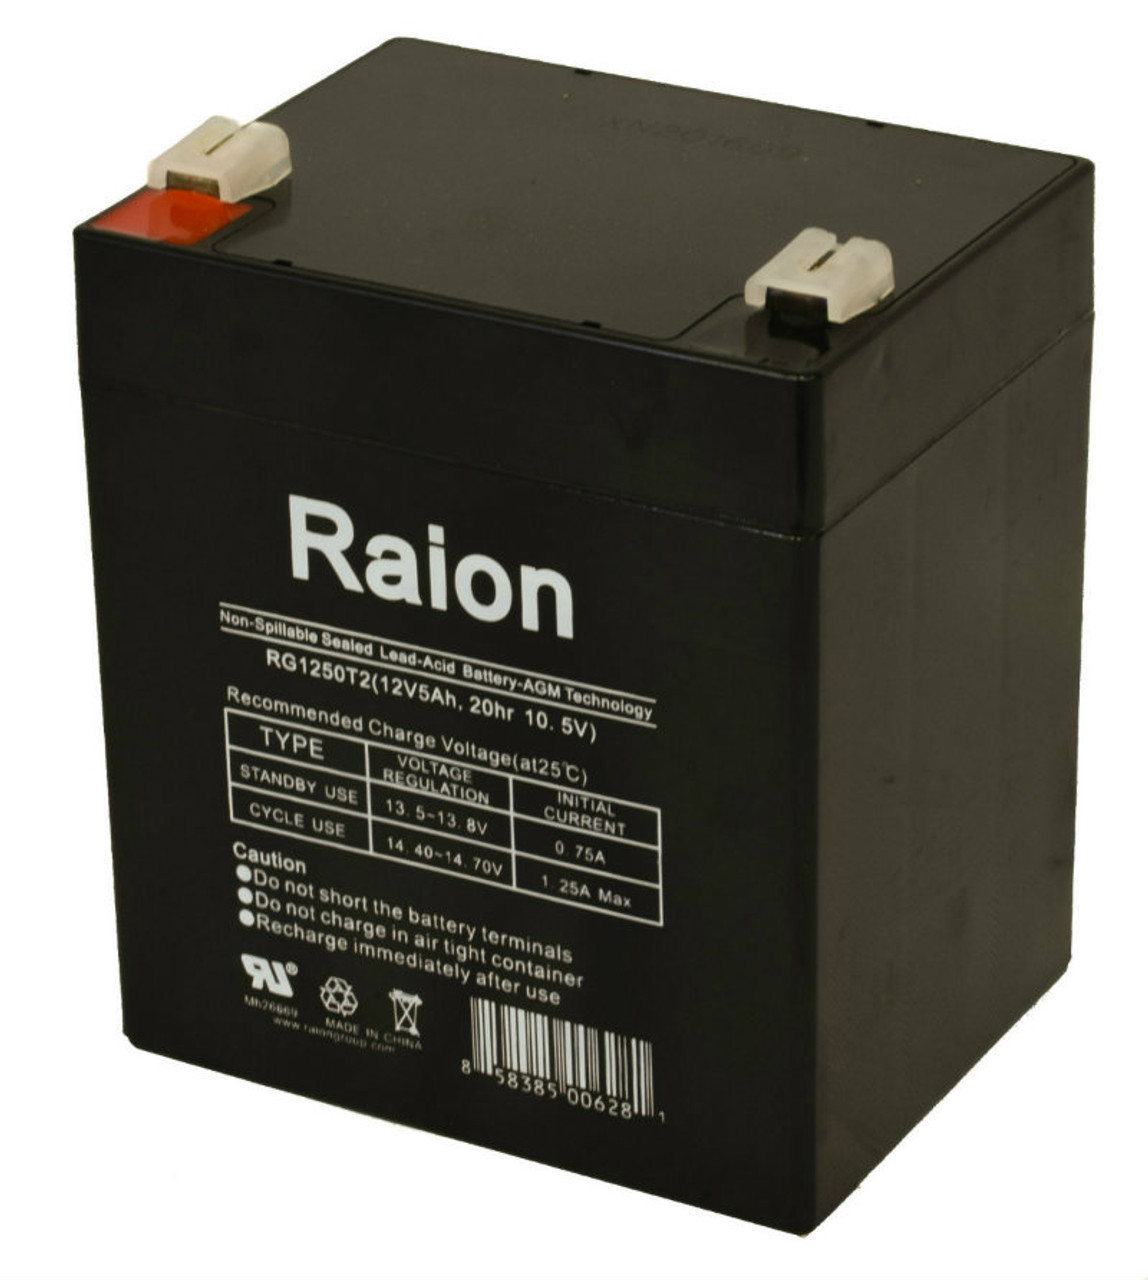 Raion Power RG1250T1 Replacement Battery for Allied Healthcare G180, G180CE Optivac Suction Unit